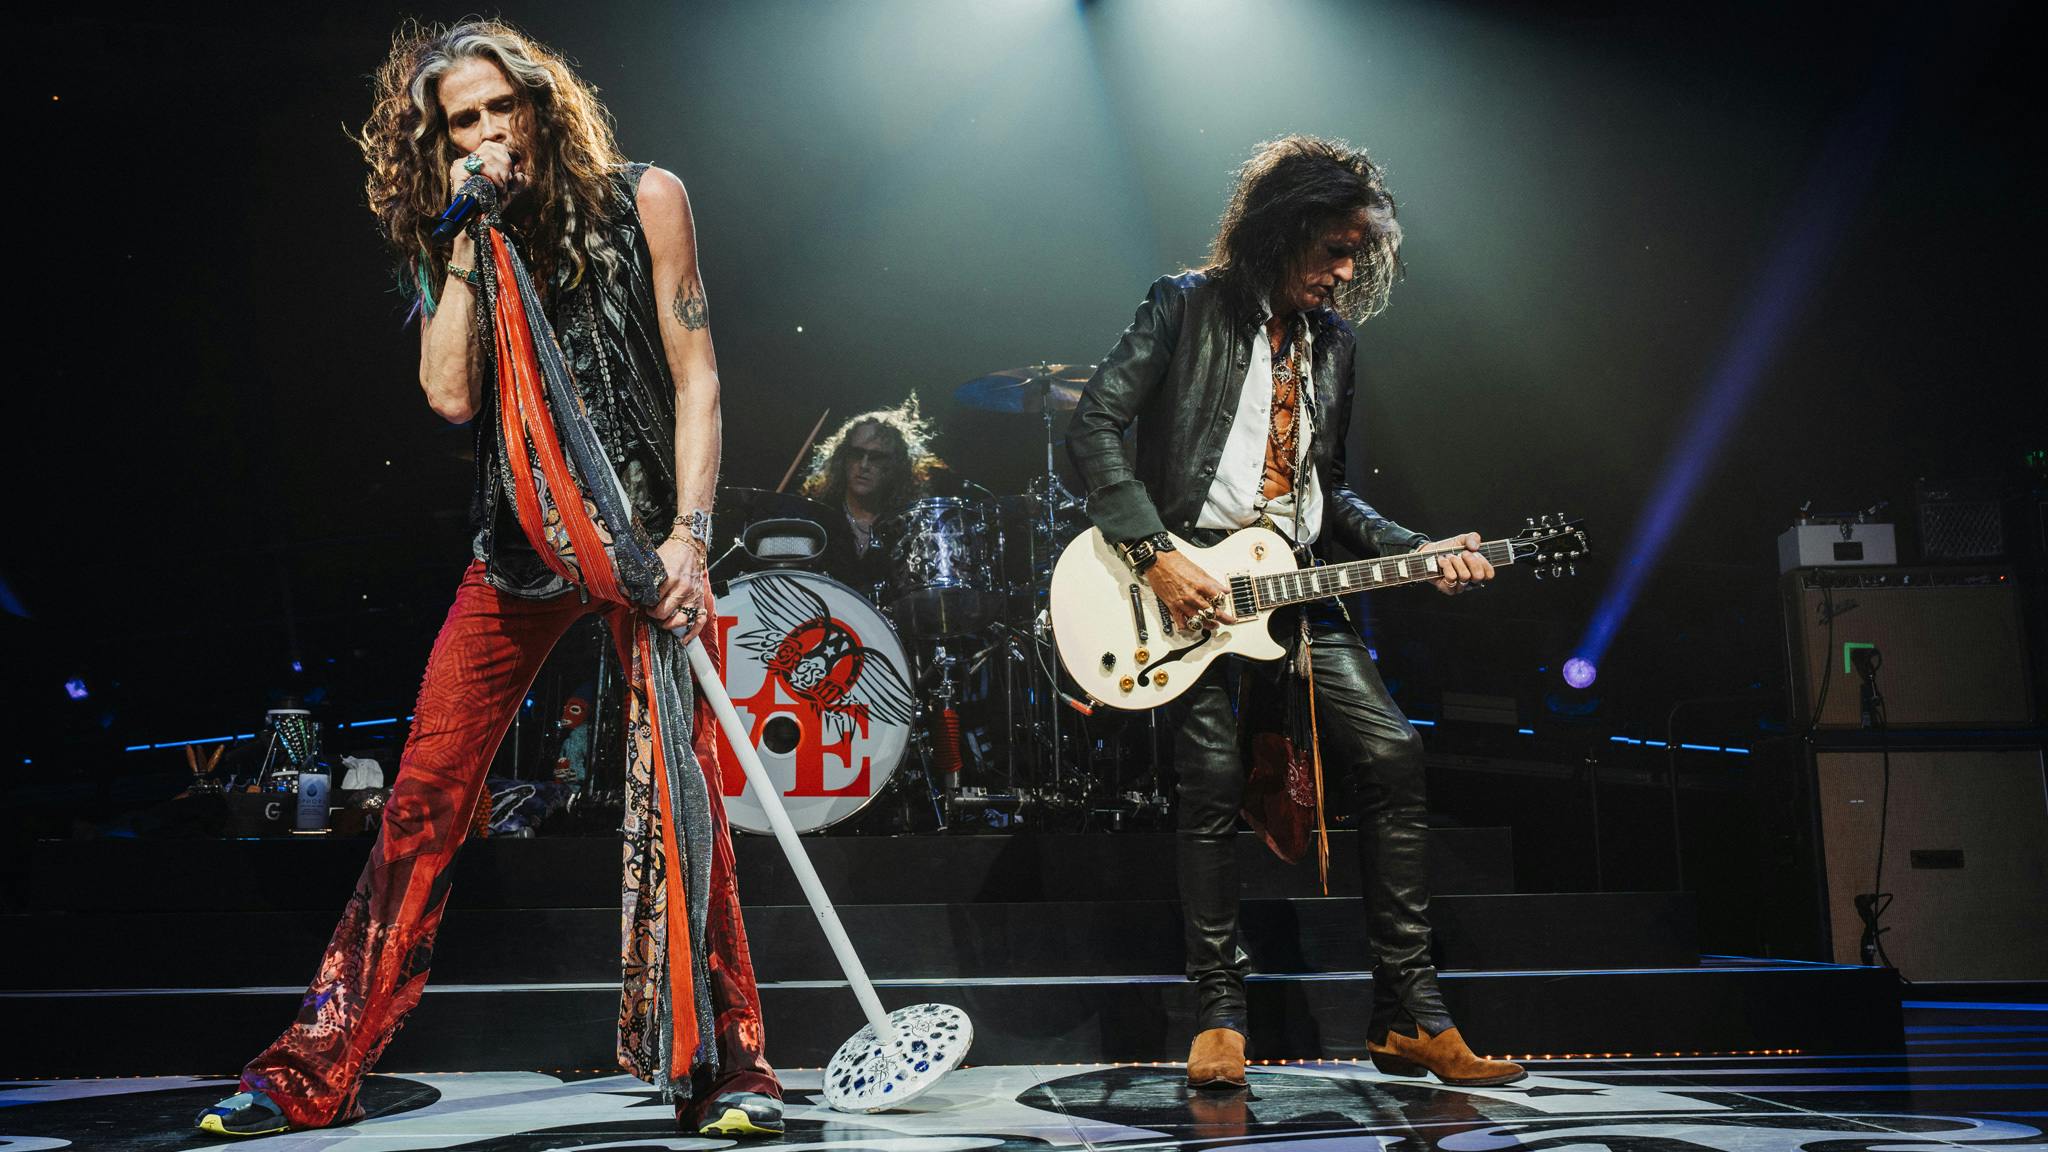 See the setlist and photos from the first night of Aerosmith’s farewell tour